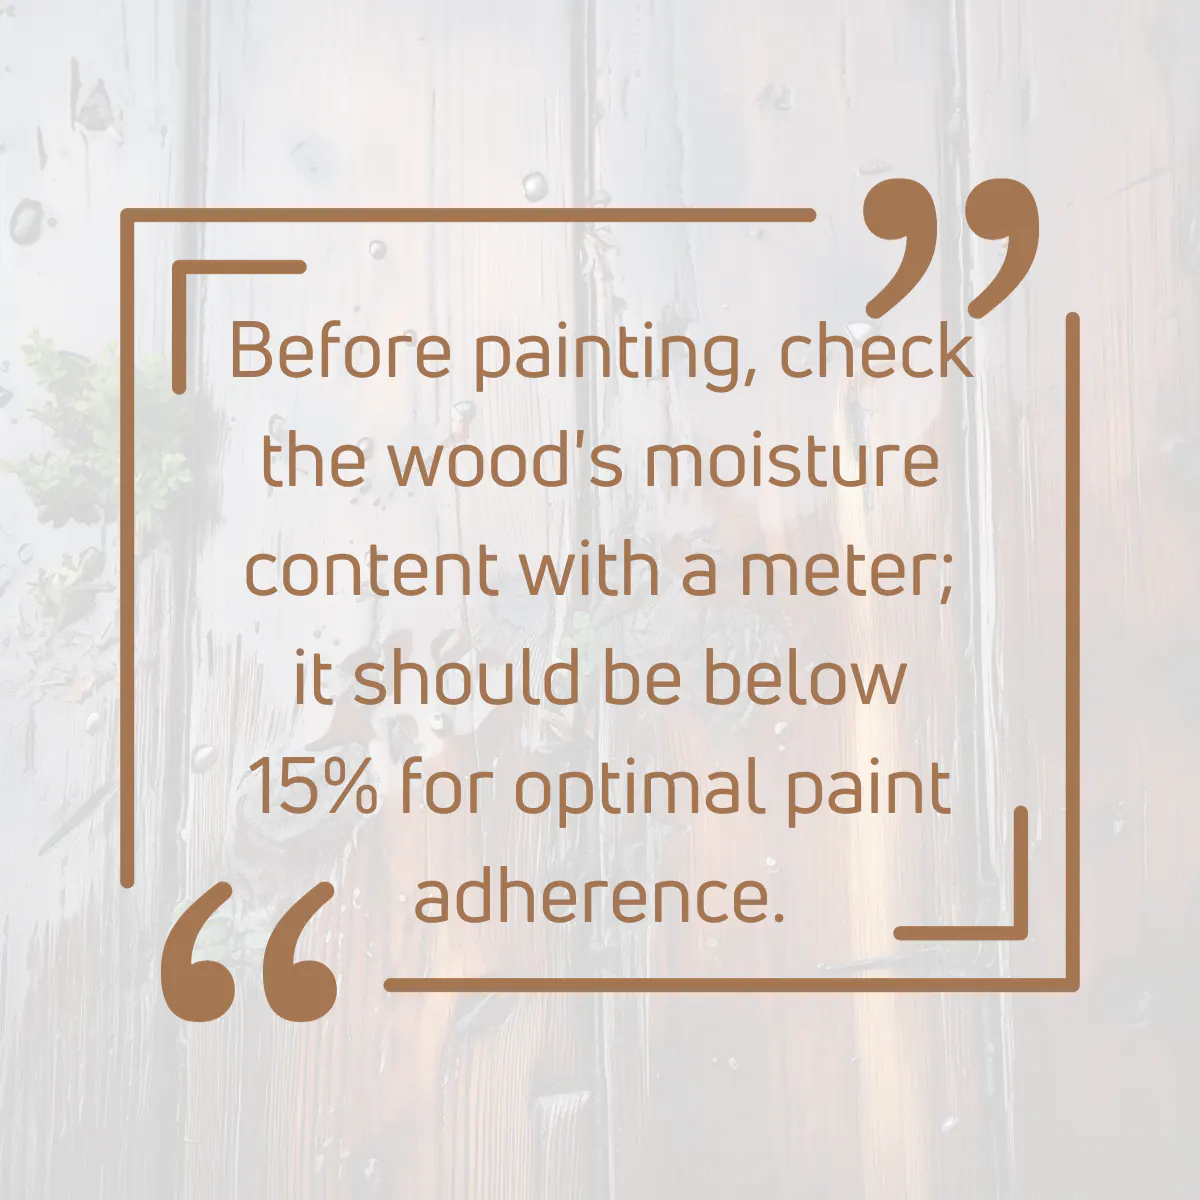 Tip for painting wet woods